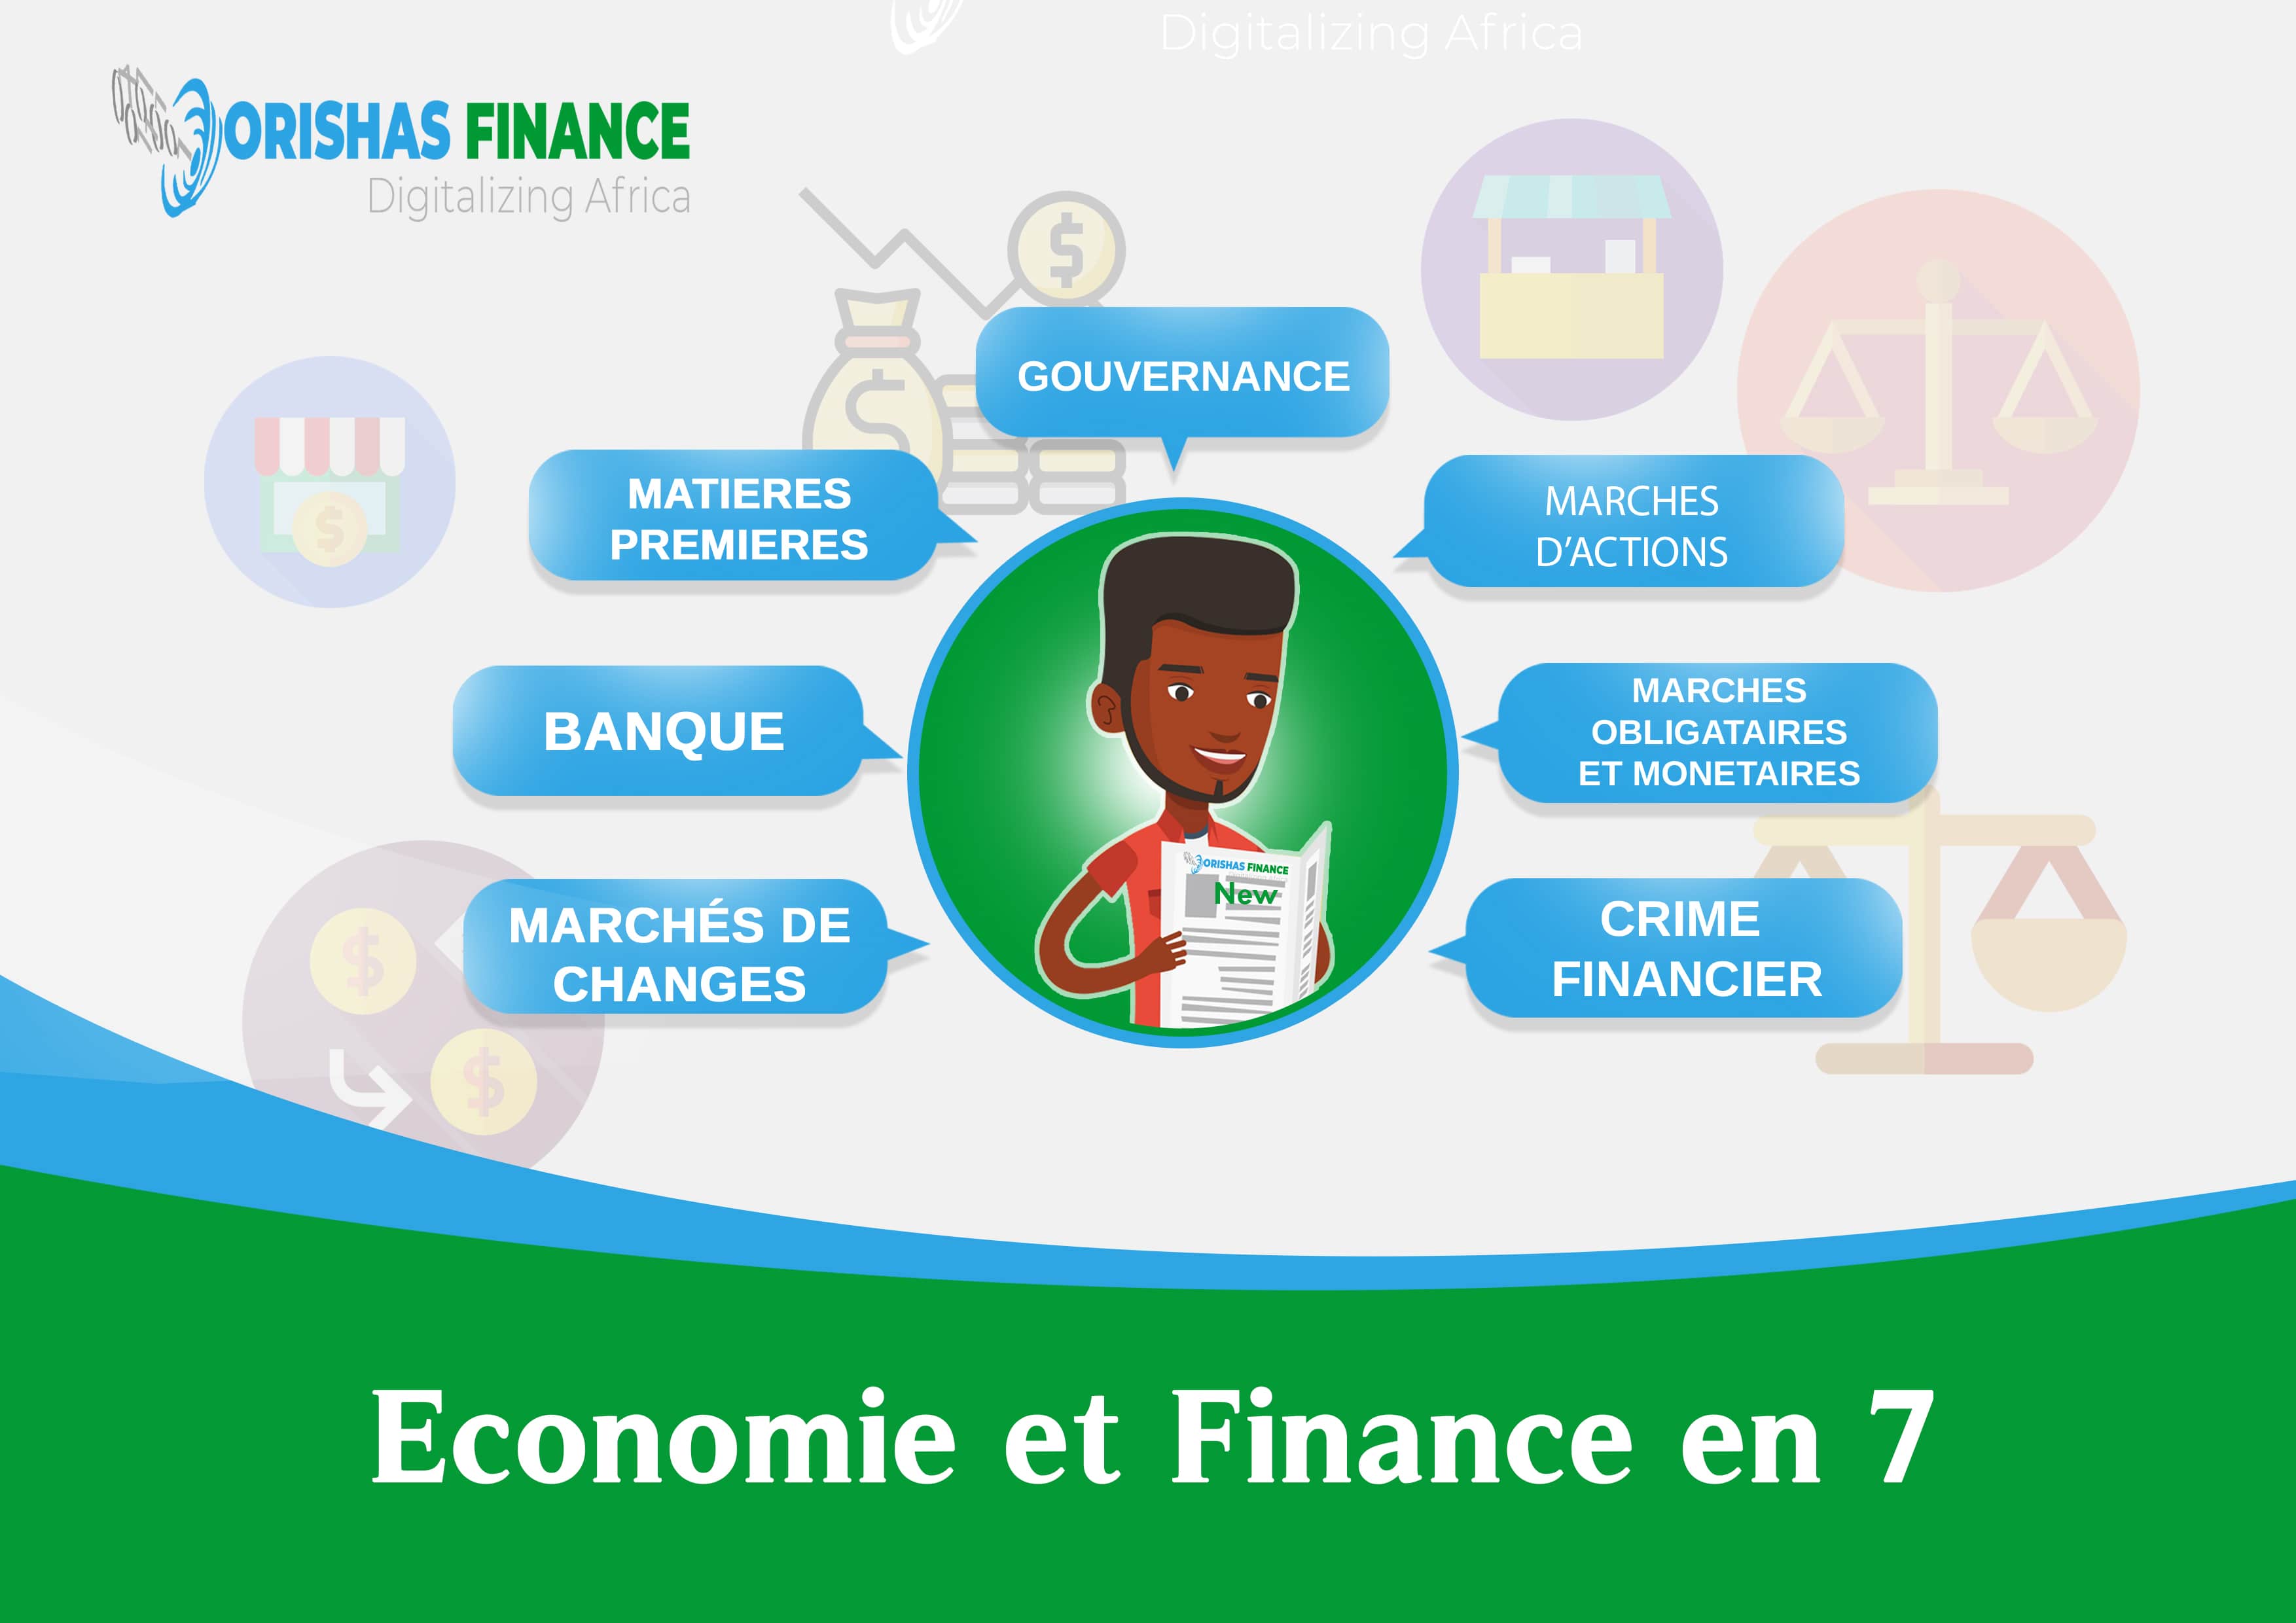  Economy and Finance in 7 from May 31 to June 04, 2021 